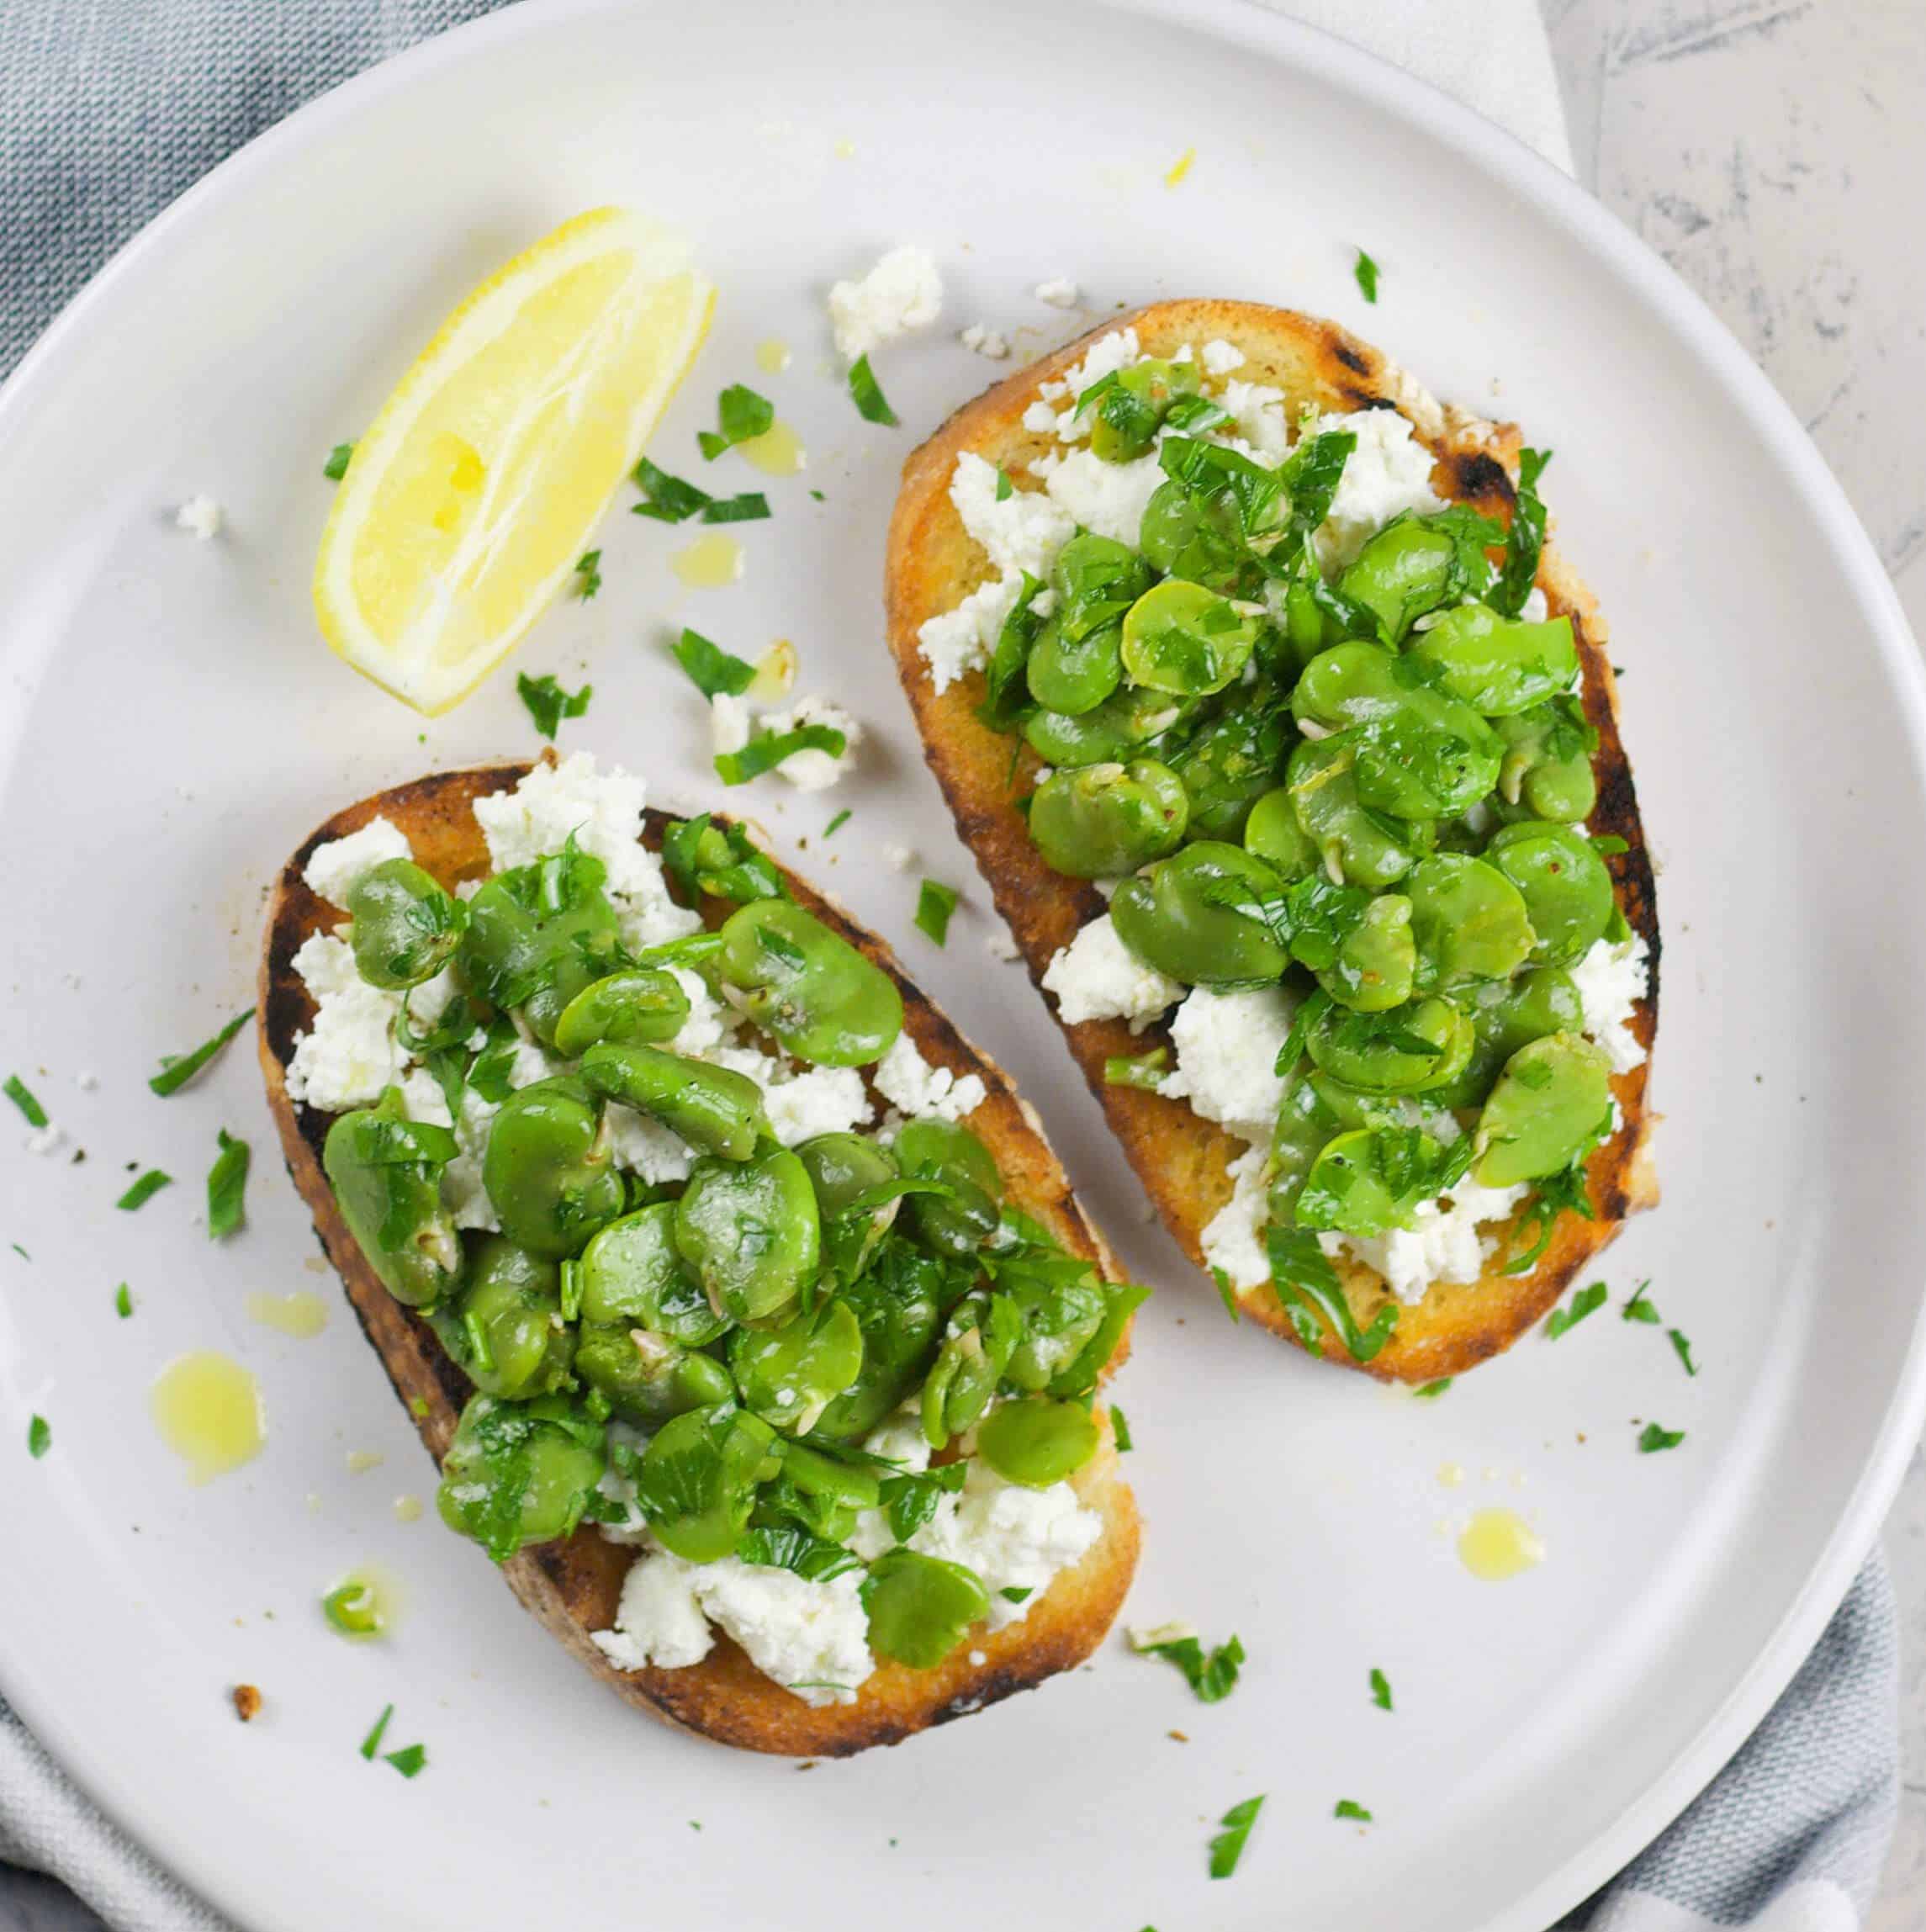 Perfect garlic toast with broad beans and goat cheese.